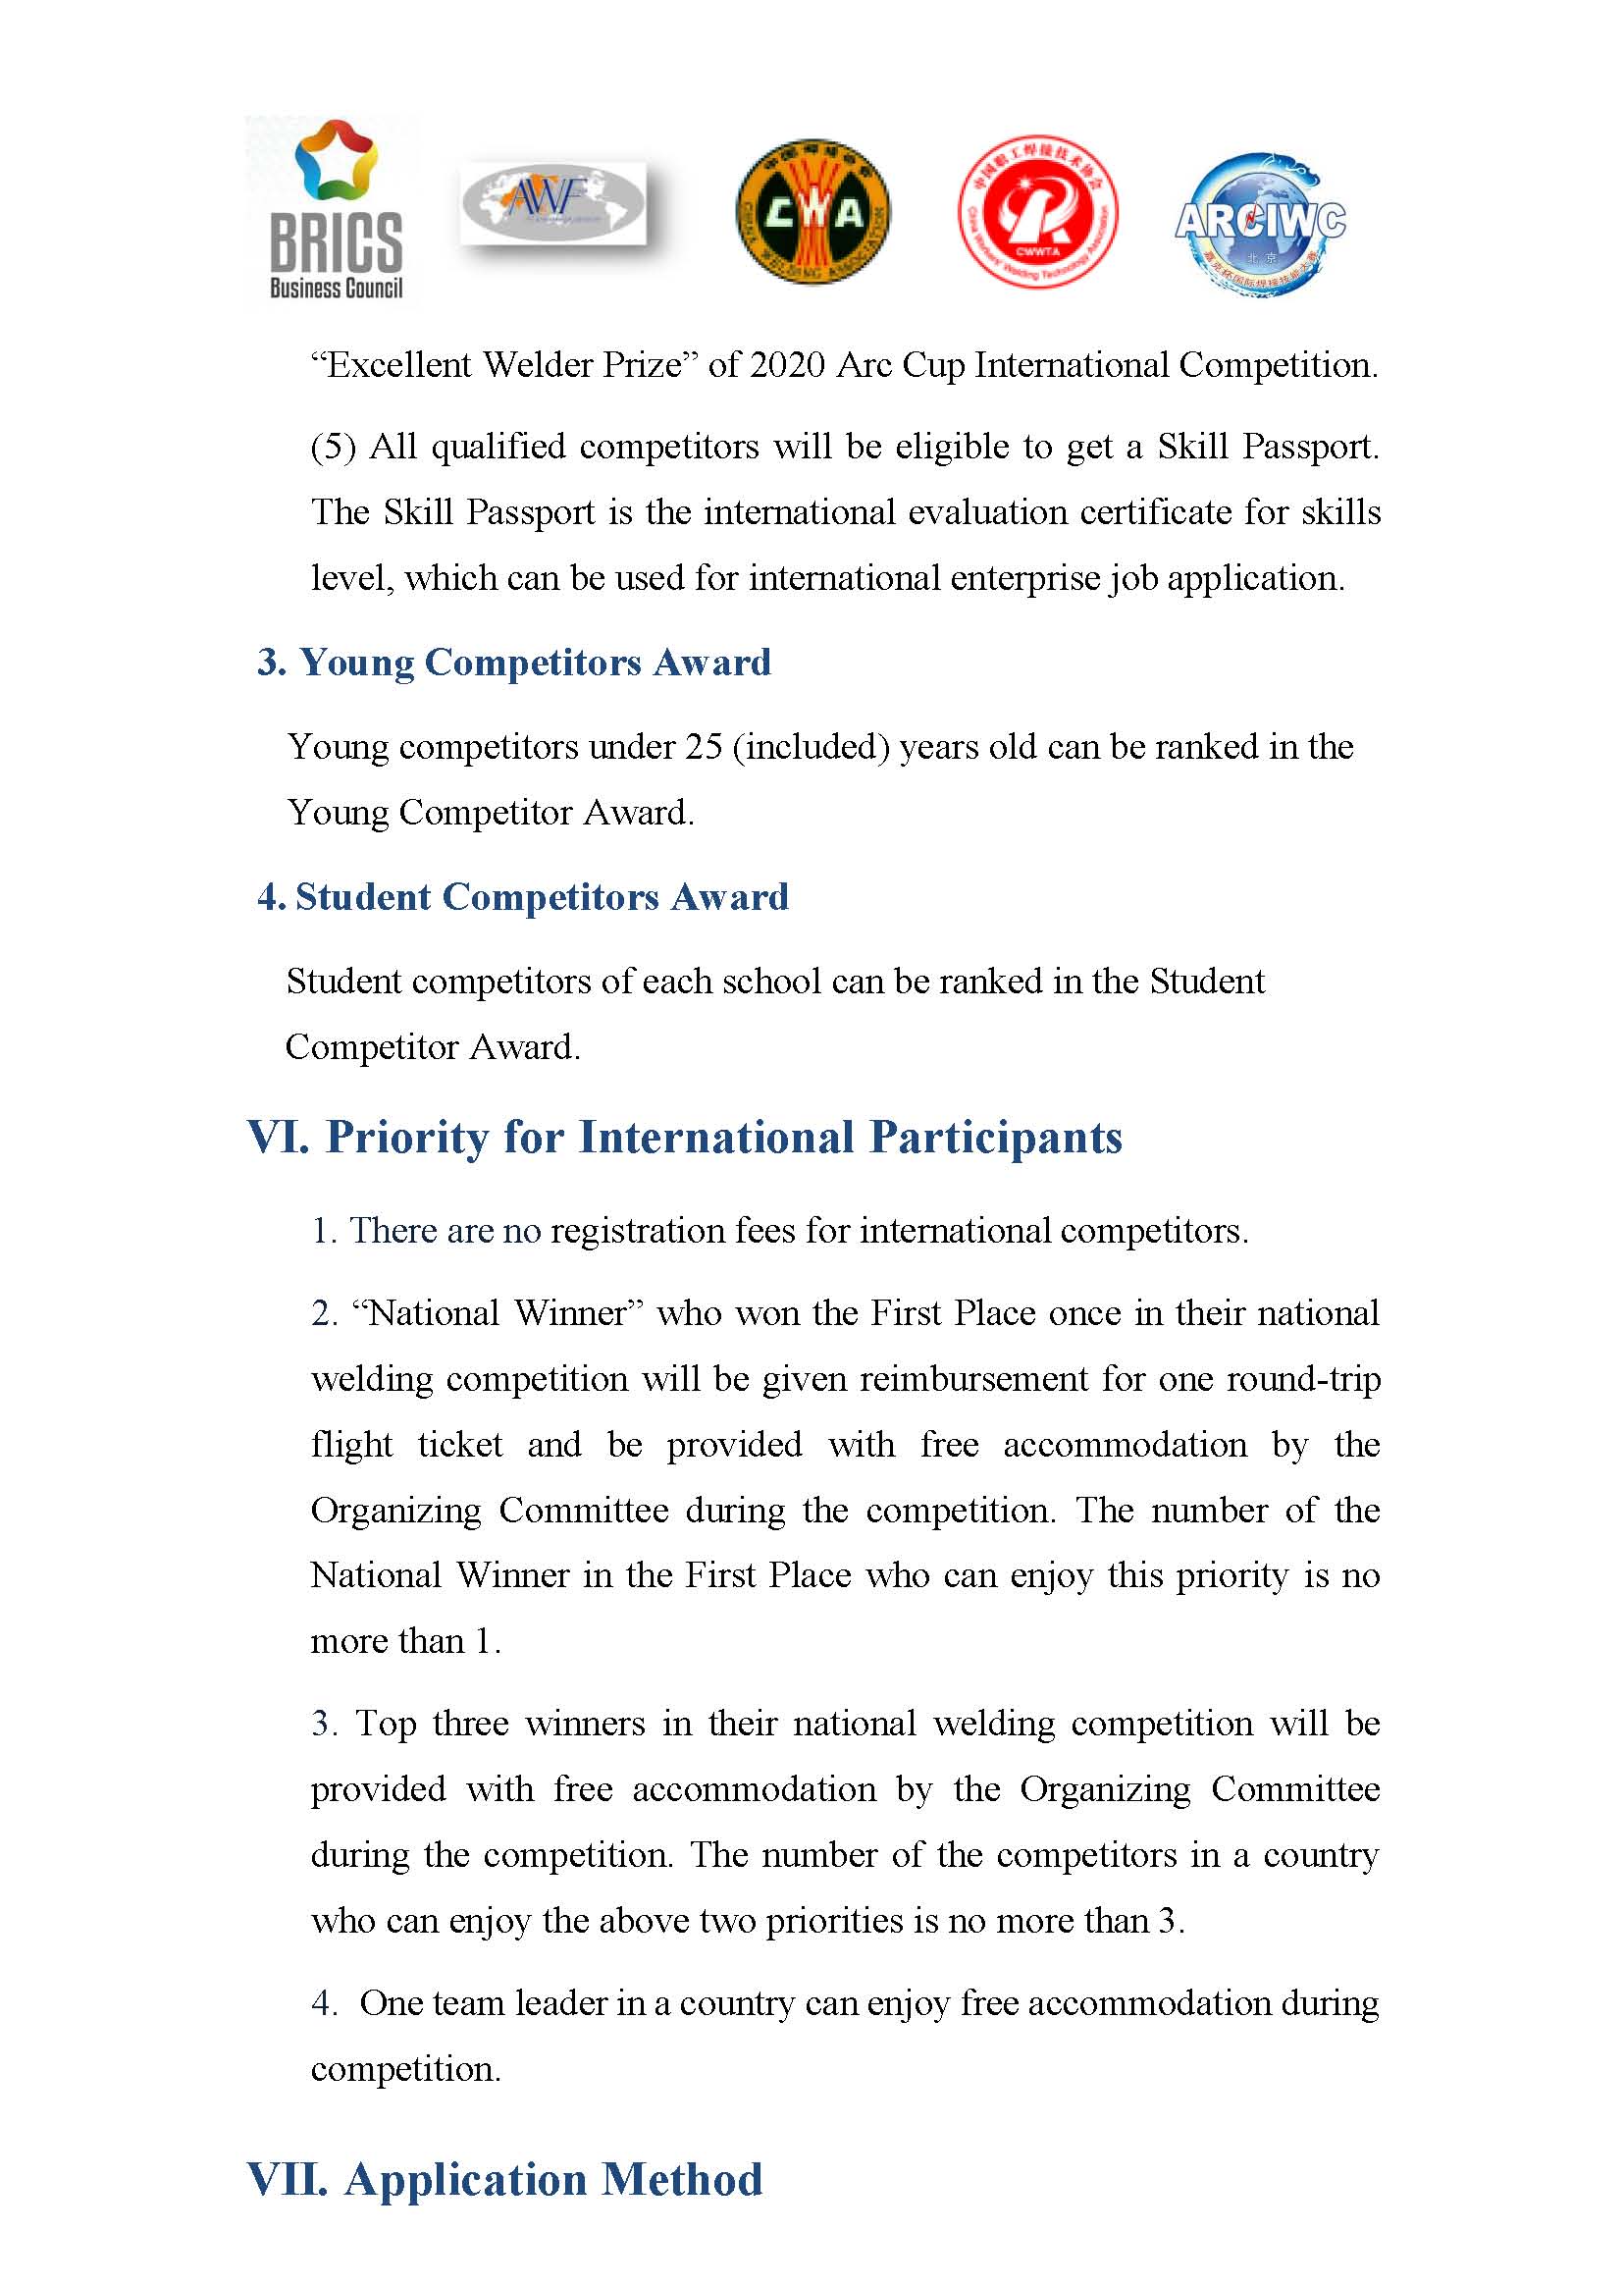 2020 Arc Cup International Welding Competition Invitation 7